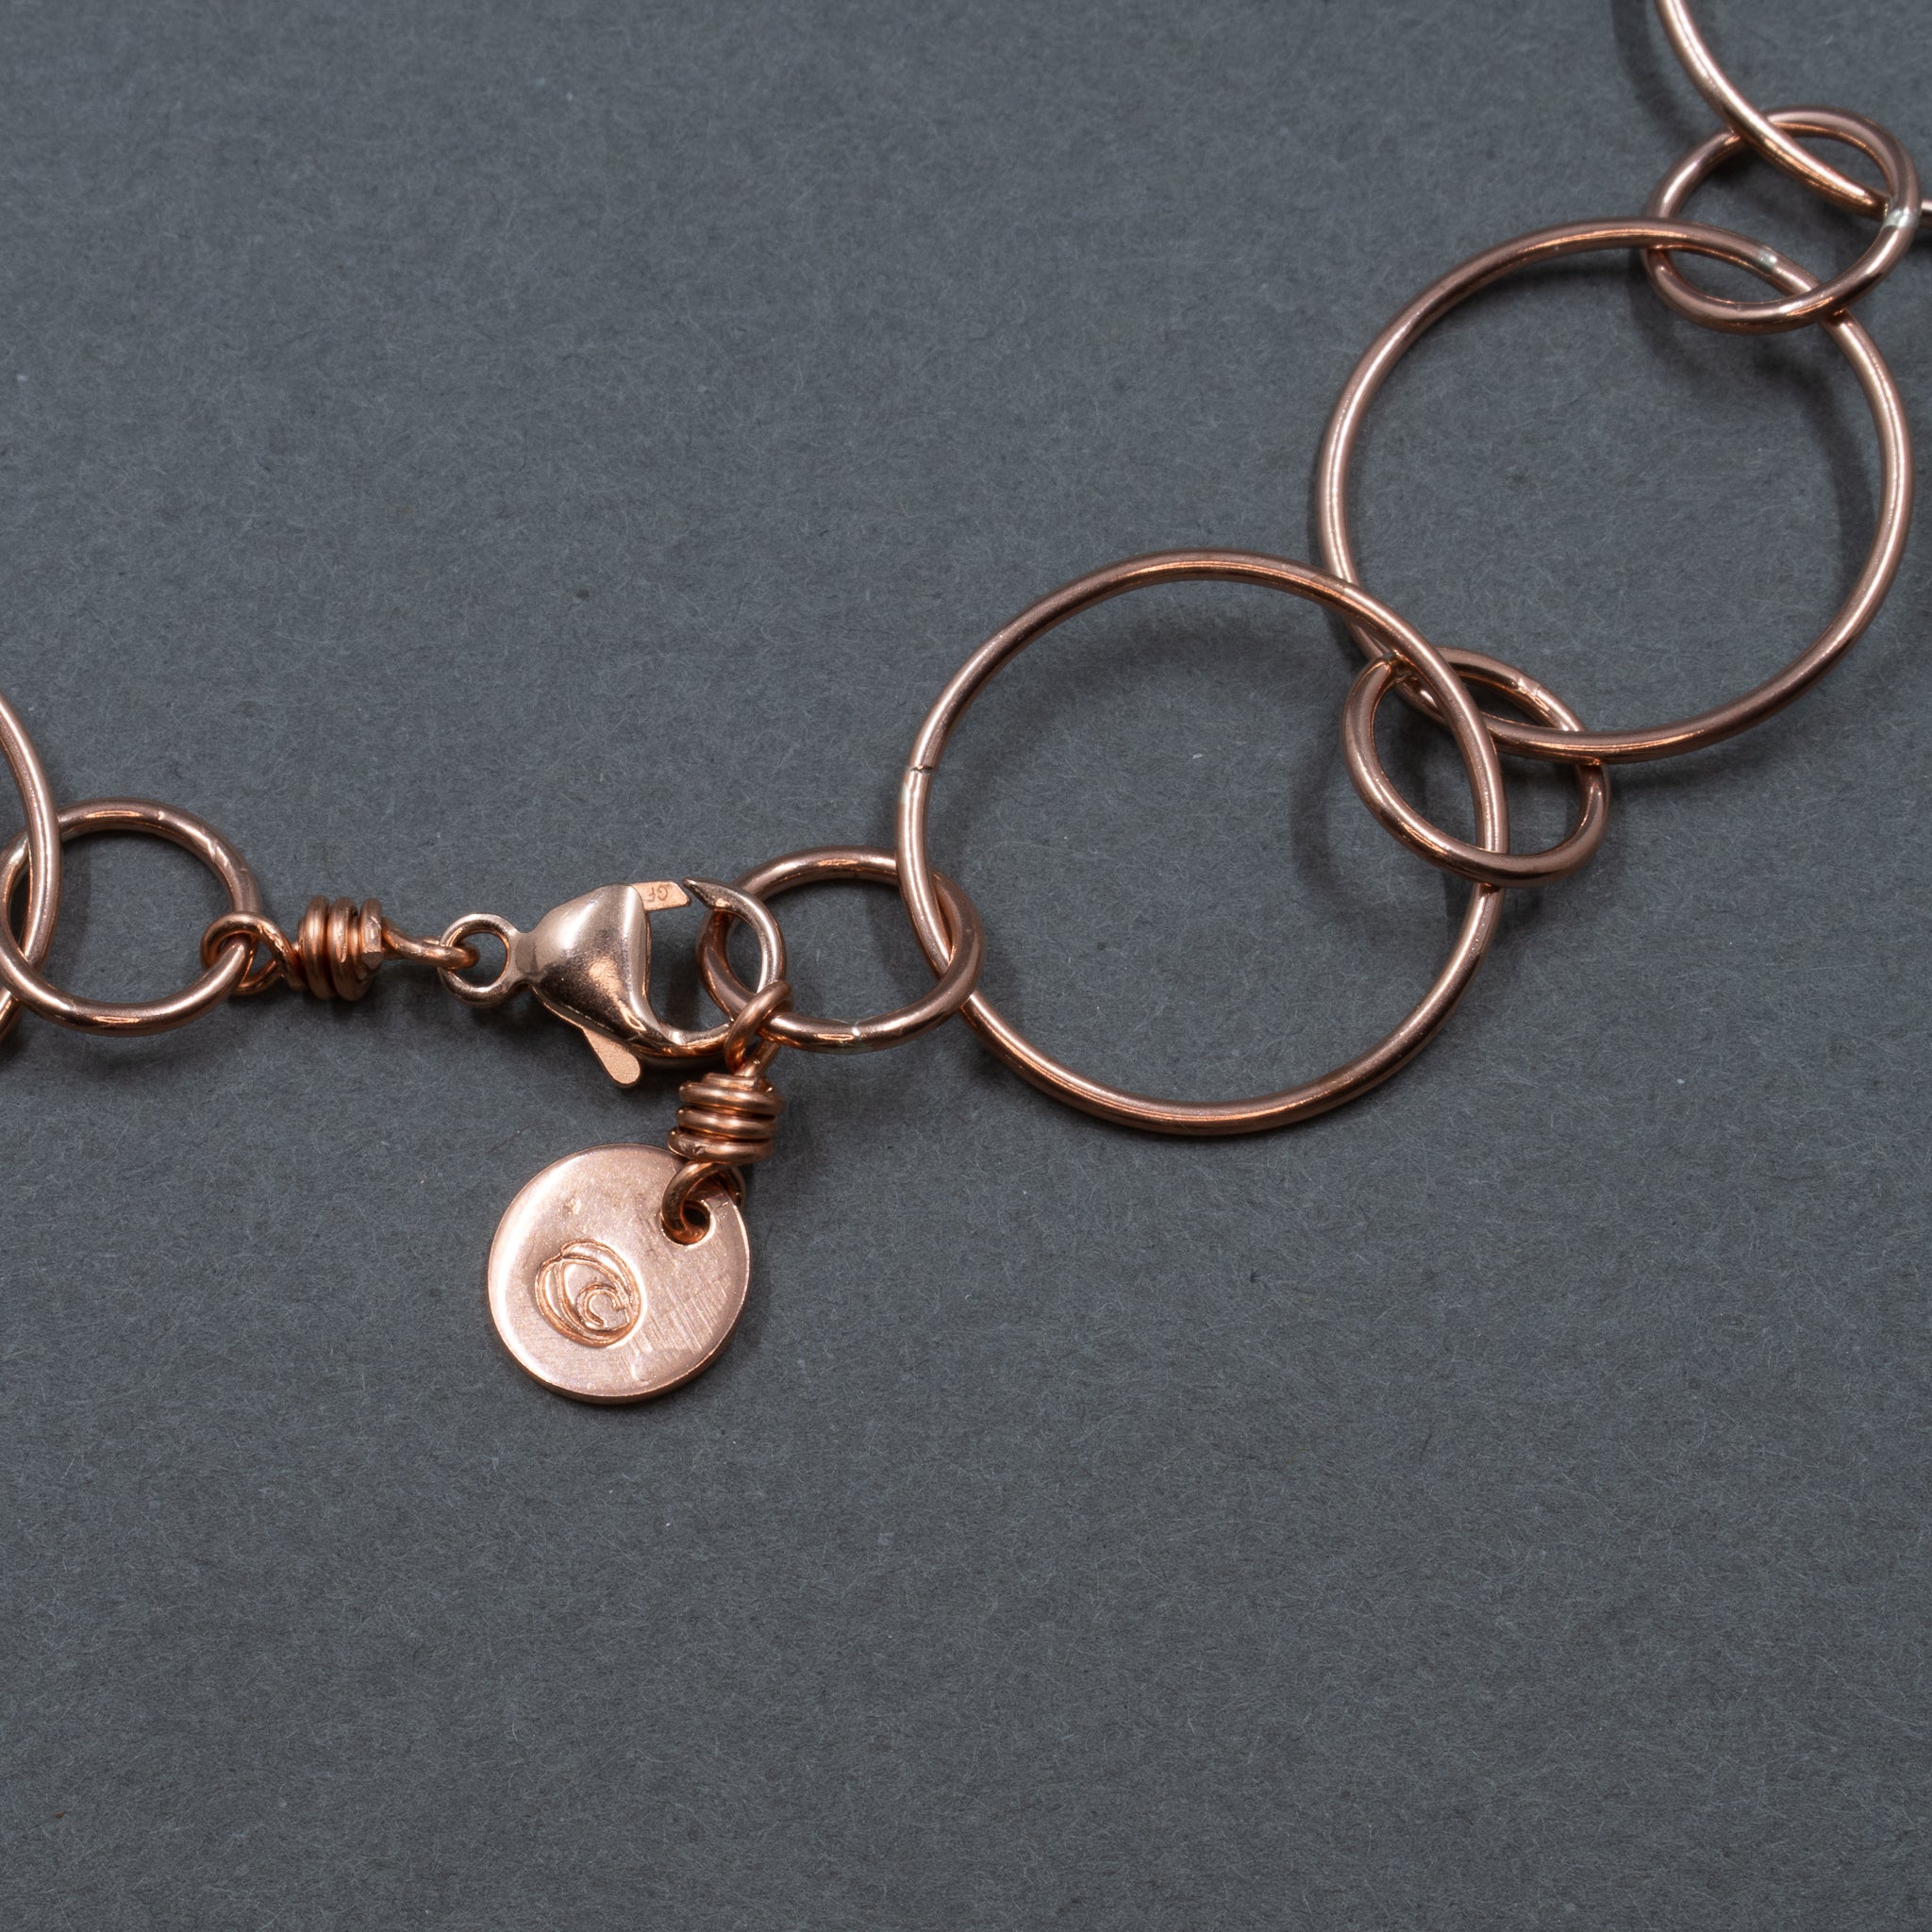 Chain Necklace in Copper with Large Round and Small Oval Links